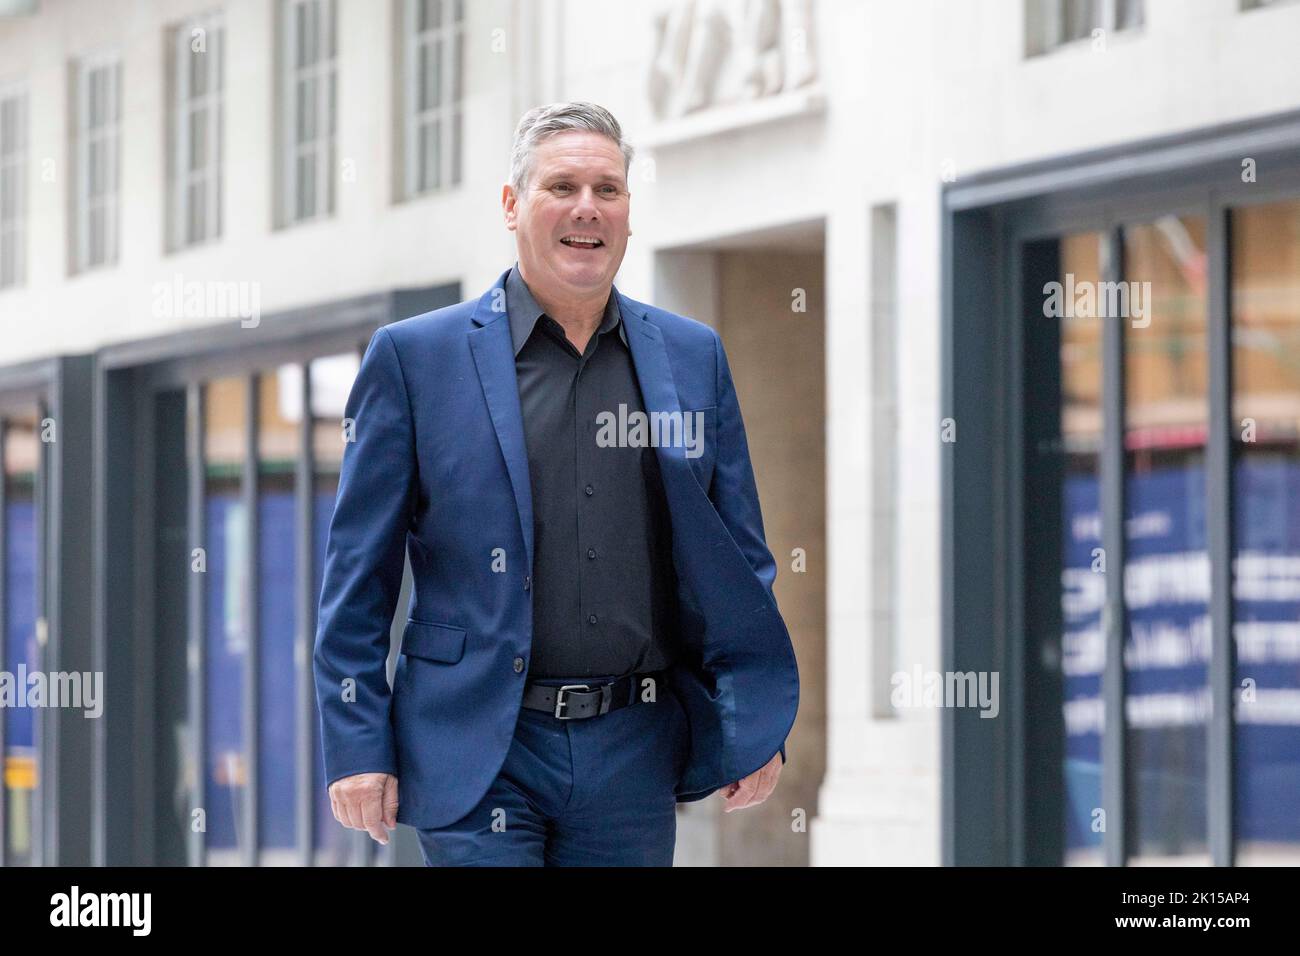 Labour Party leader Sir Keir Starmer appears at BBC studios this morning.   Image shot on 1st Sep 2022.  © Belinda Jiao   jiao.bilin@gmail.com 0759893 Stock Photo